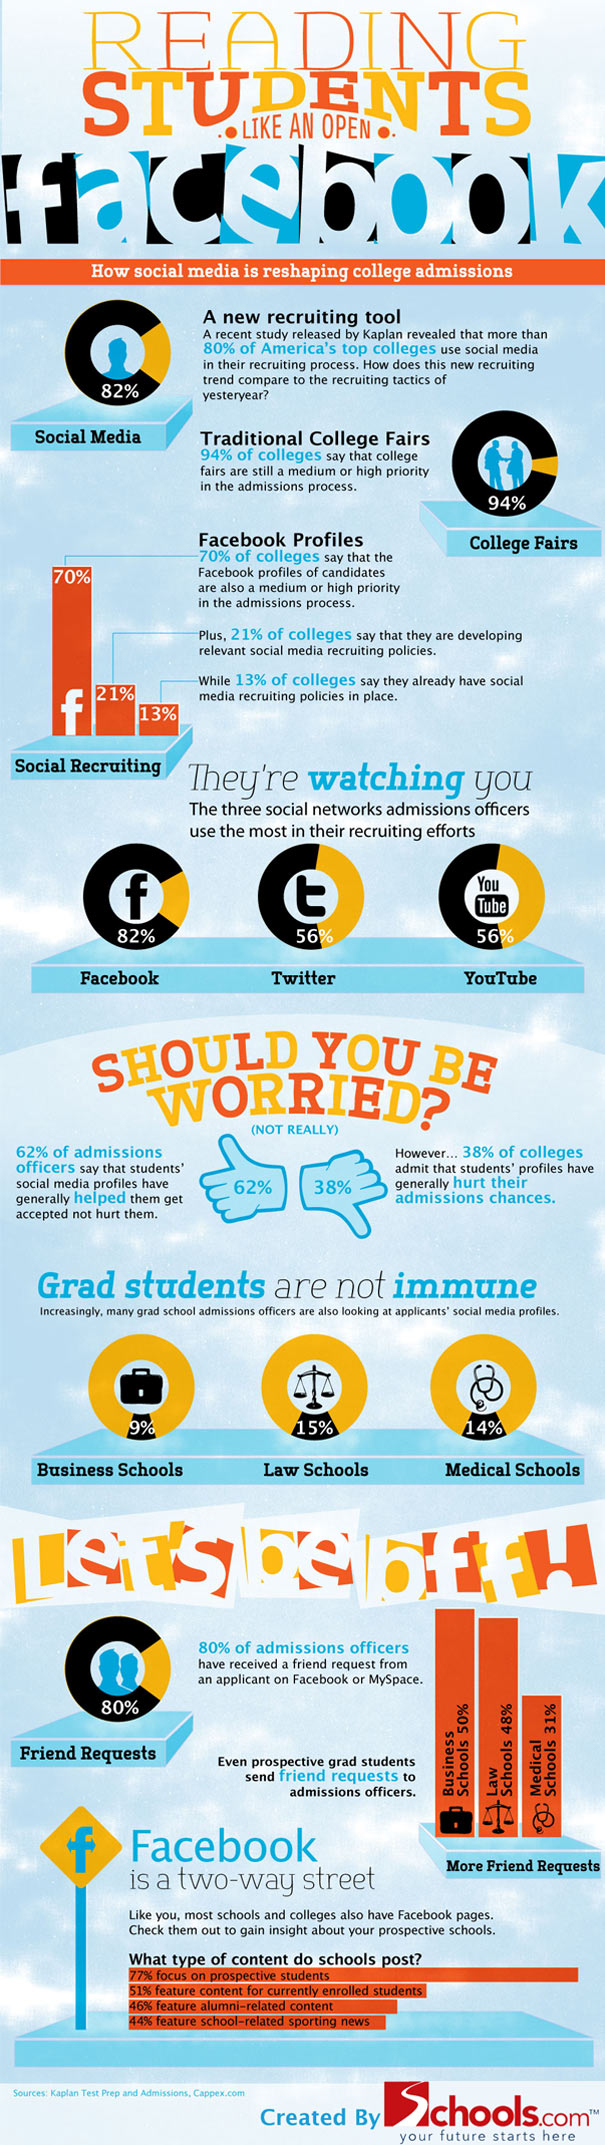 Facebook Impact On College Admissions